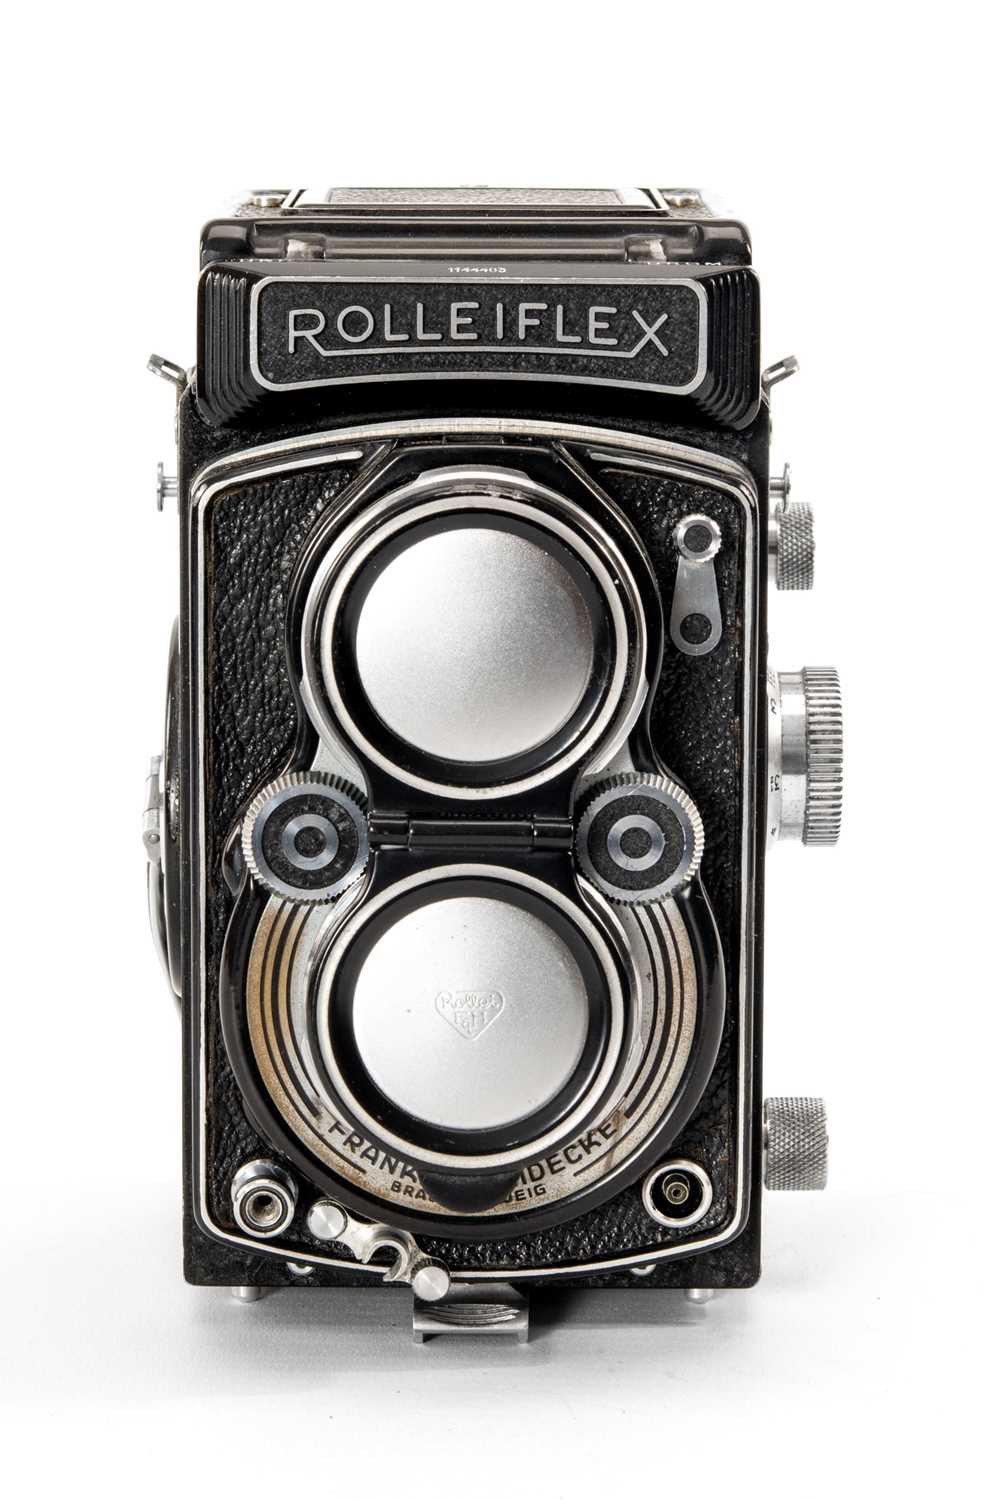 A ROLLEIFLEX 2.8F MEDIUM FORMAT CAMERA - black, serial no. 1144403, with a Zeiss-Opton, Tessar f/2.8 - Image 2 of 2